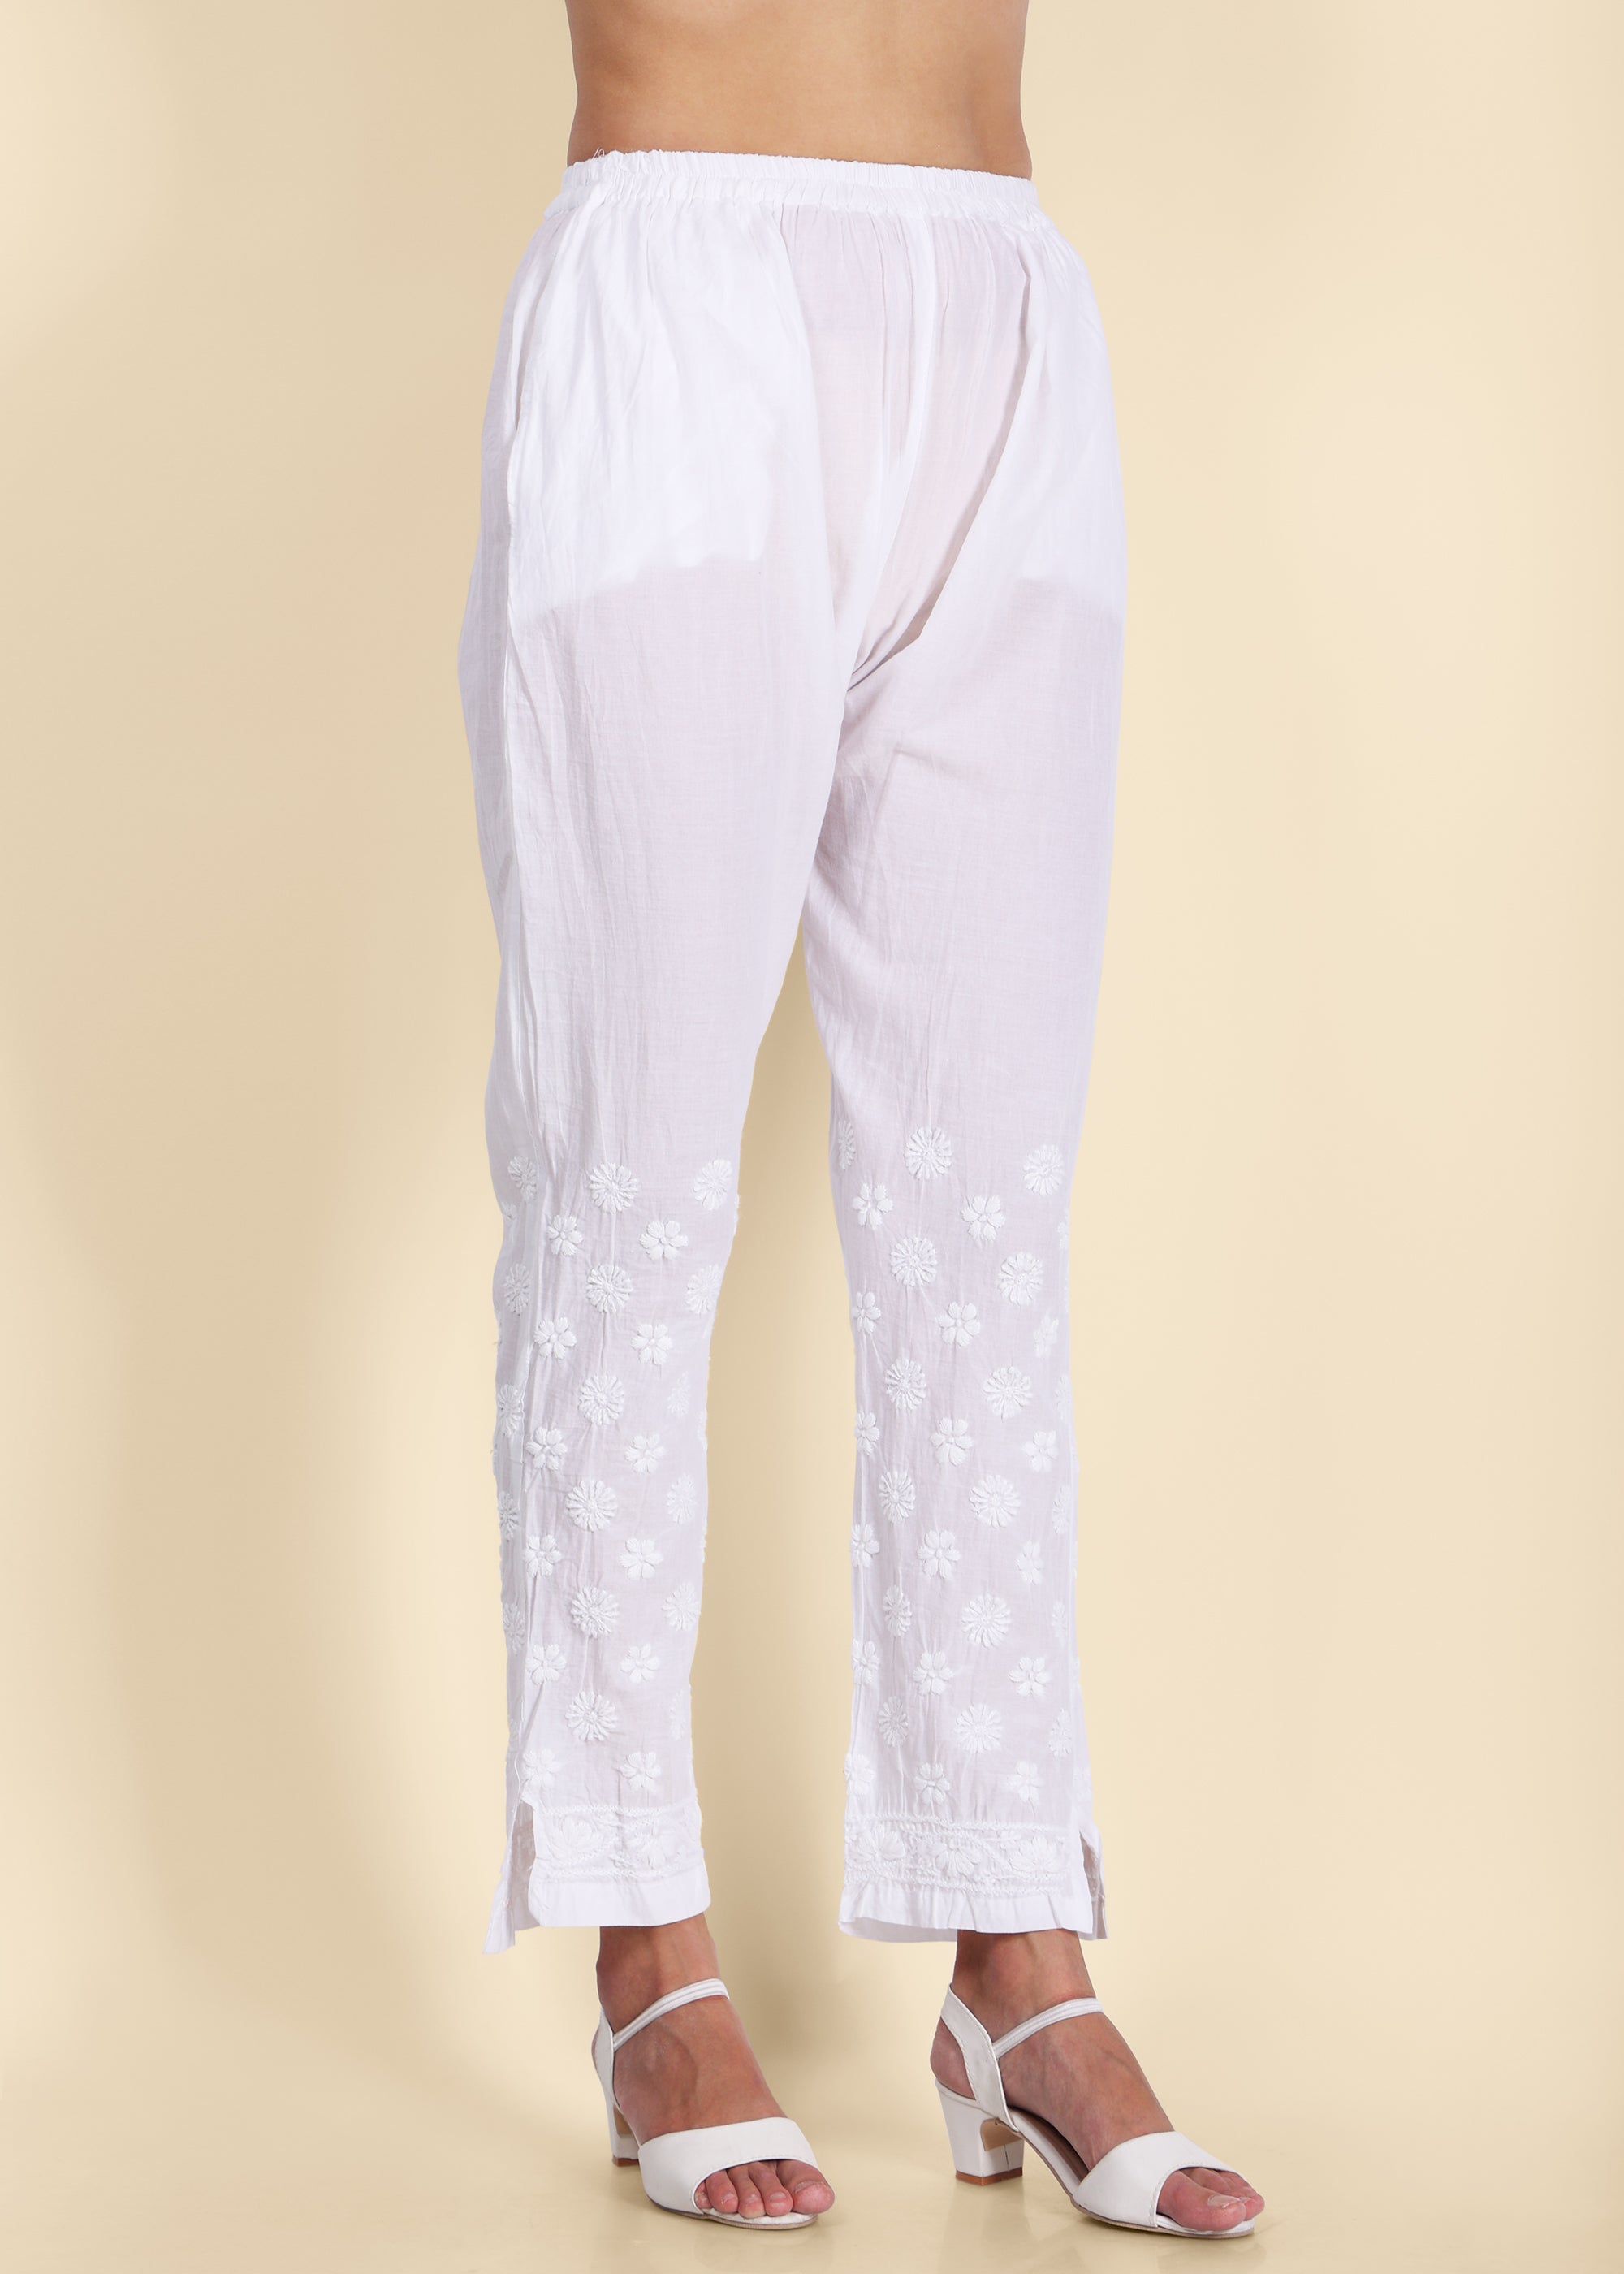 Buy Off White Lace Pants Online  Aarke International Store View